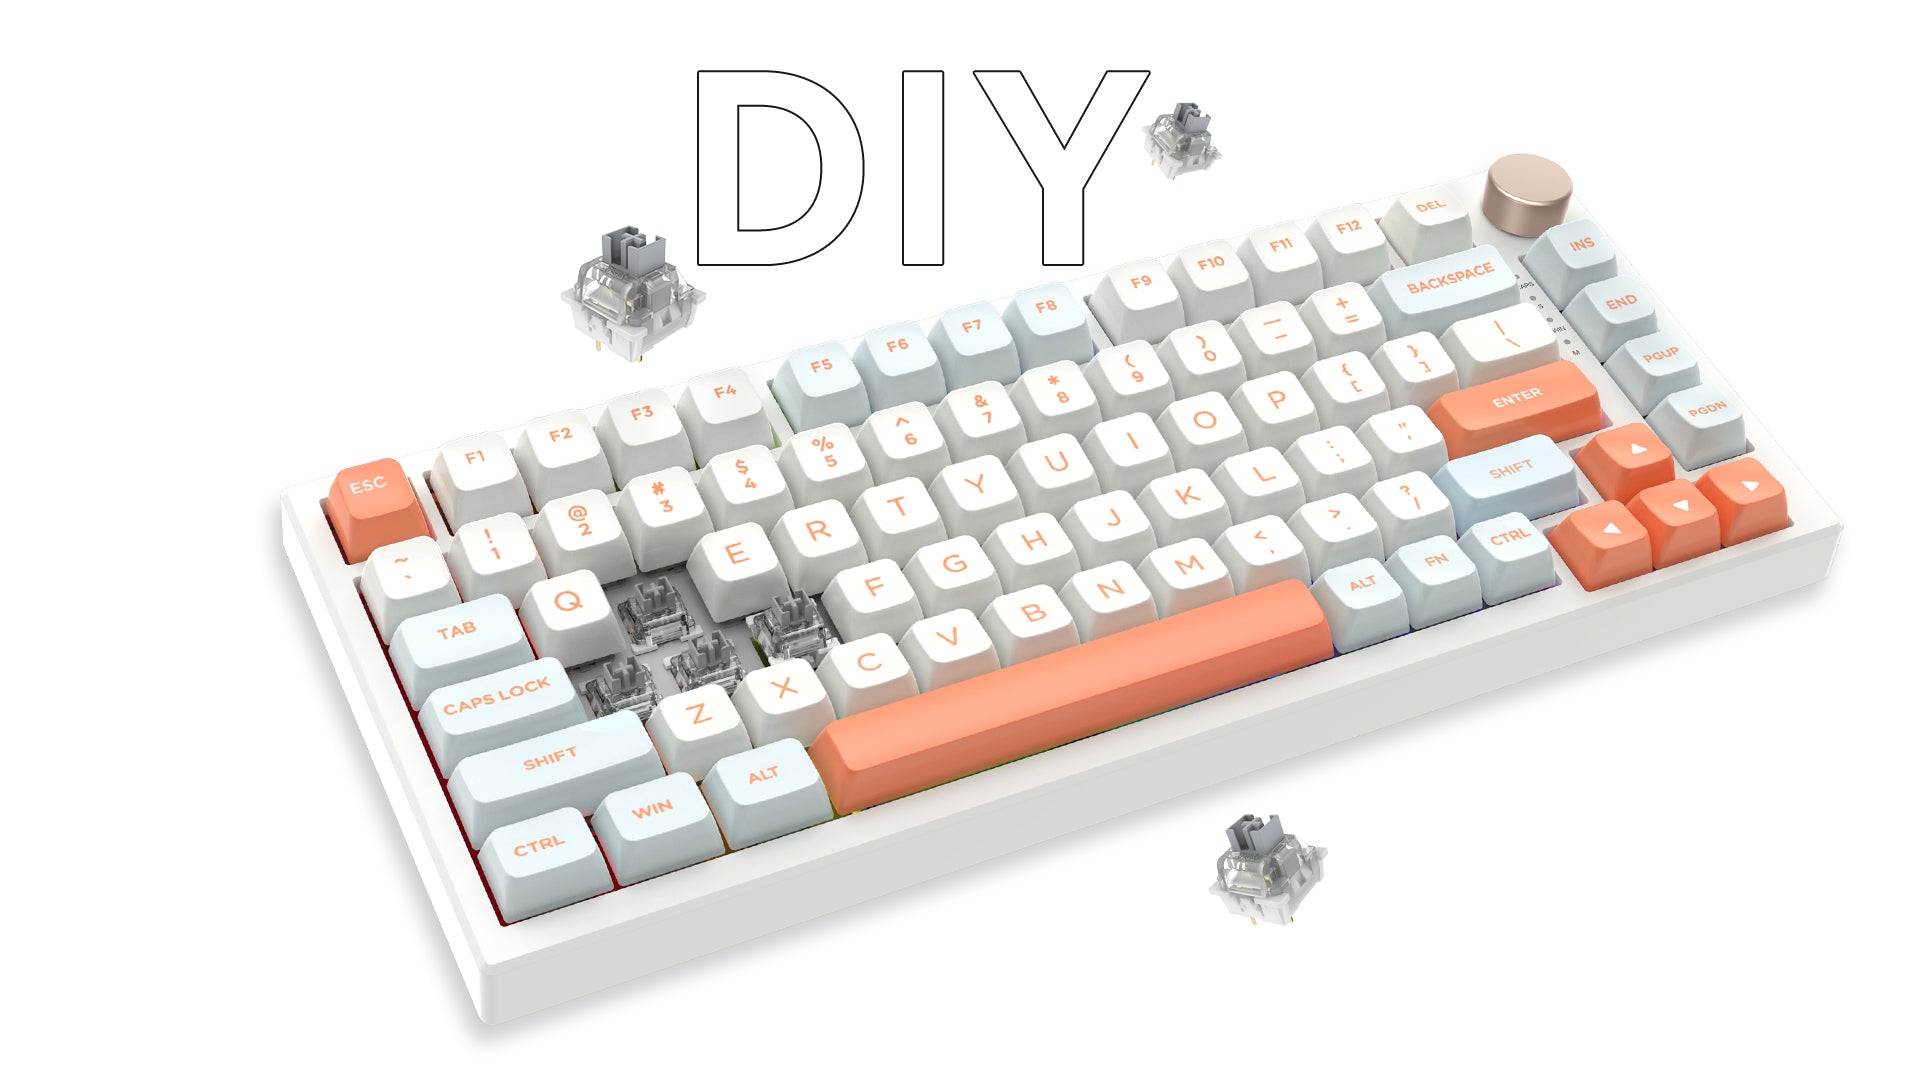 Introduction to Hot-Swappable Keyboards